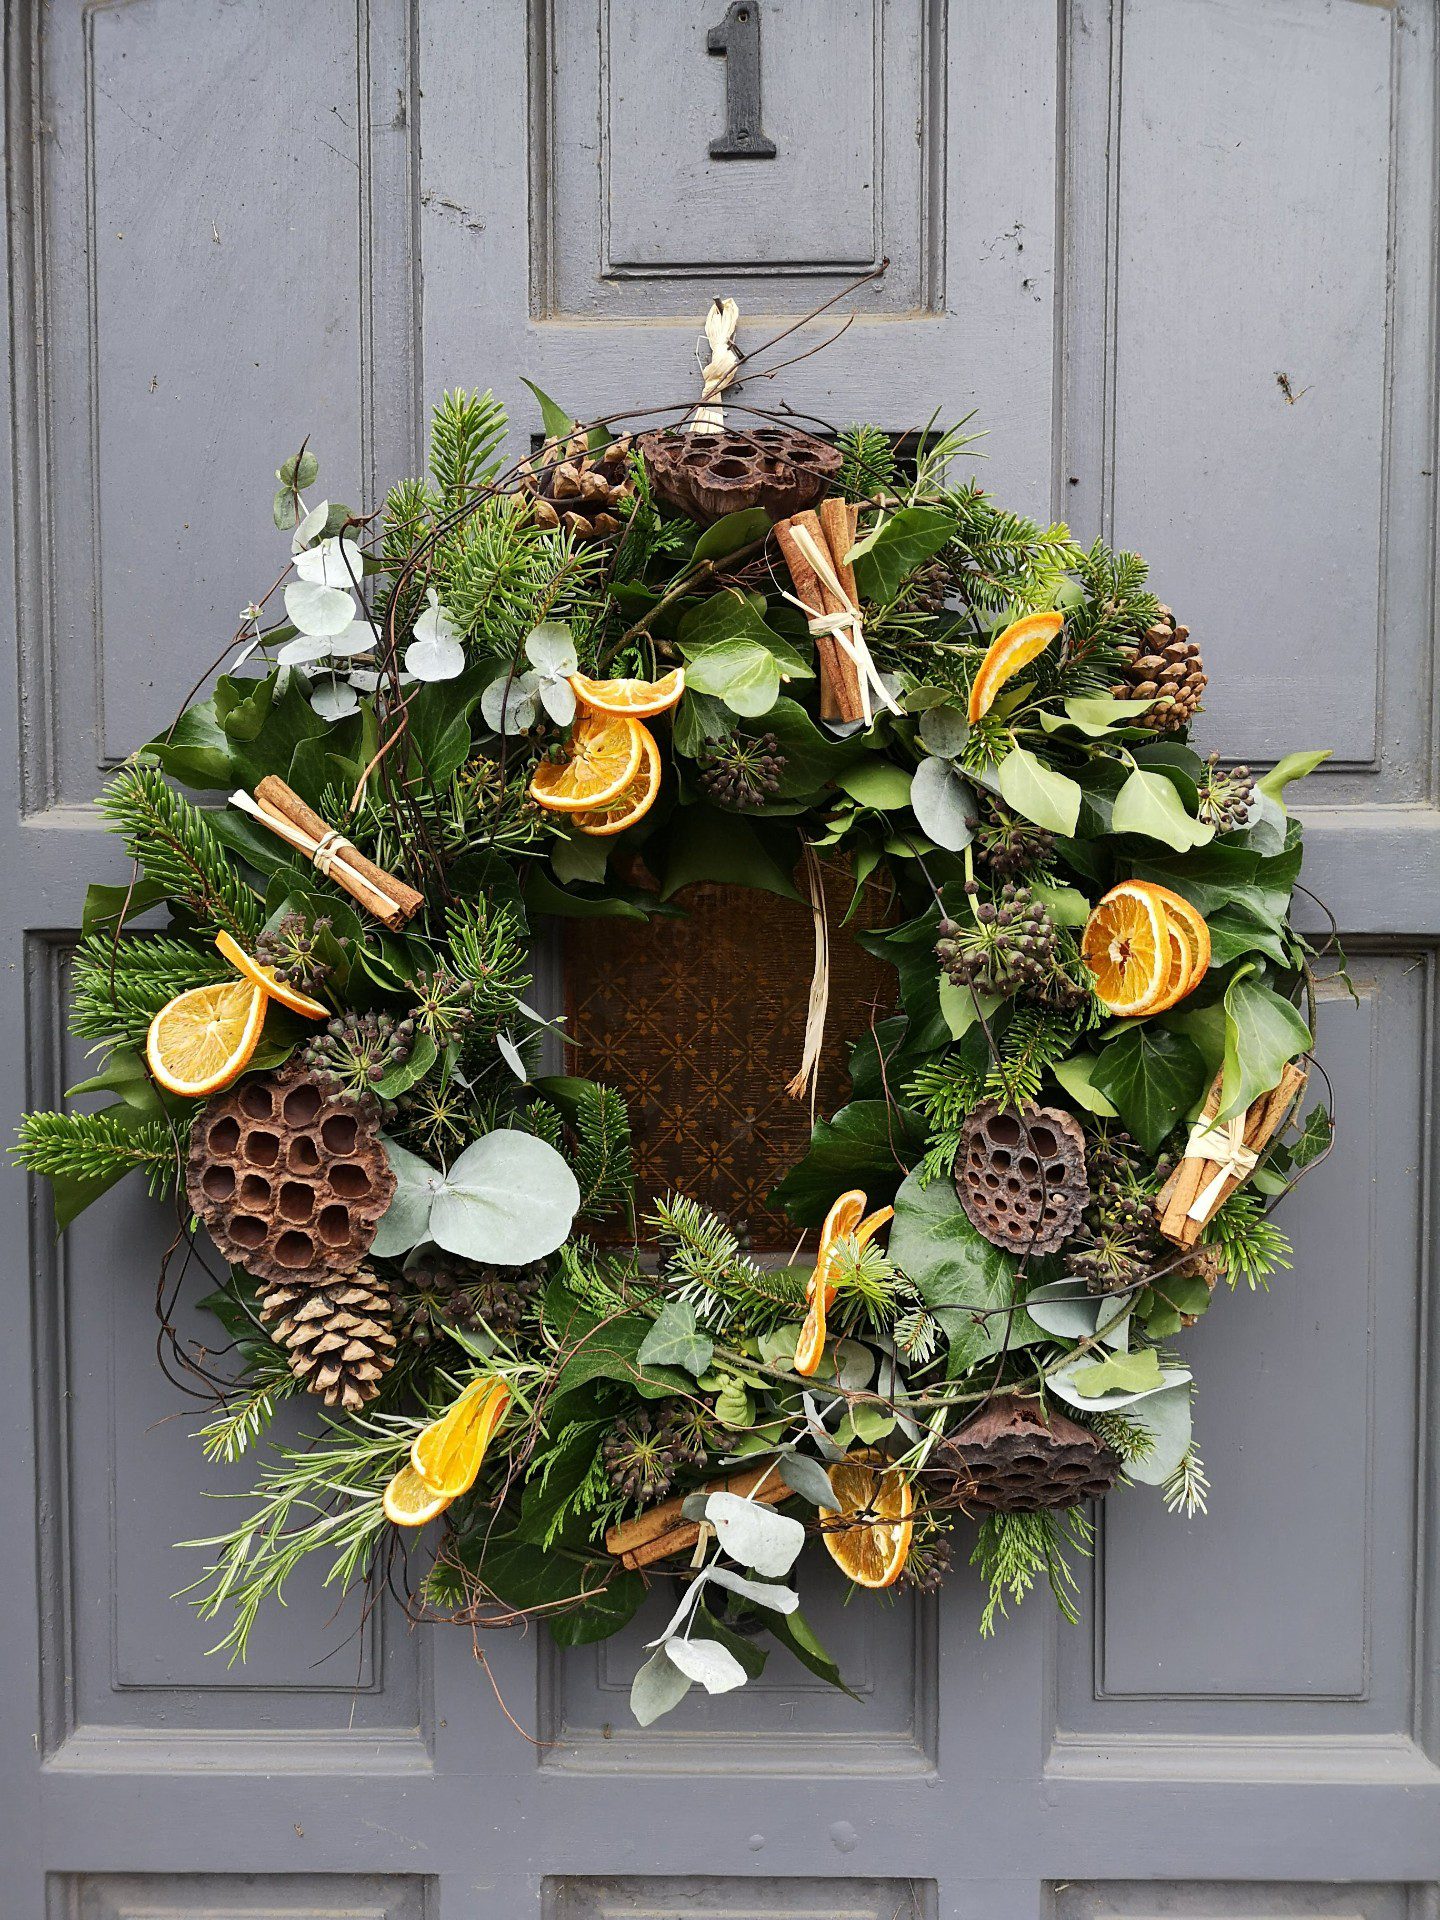 Front door with wreath hanging up. The wreath is green and orange colours.